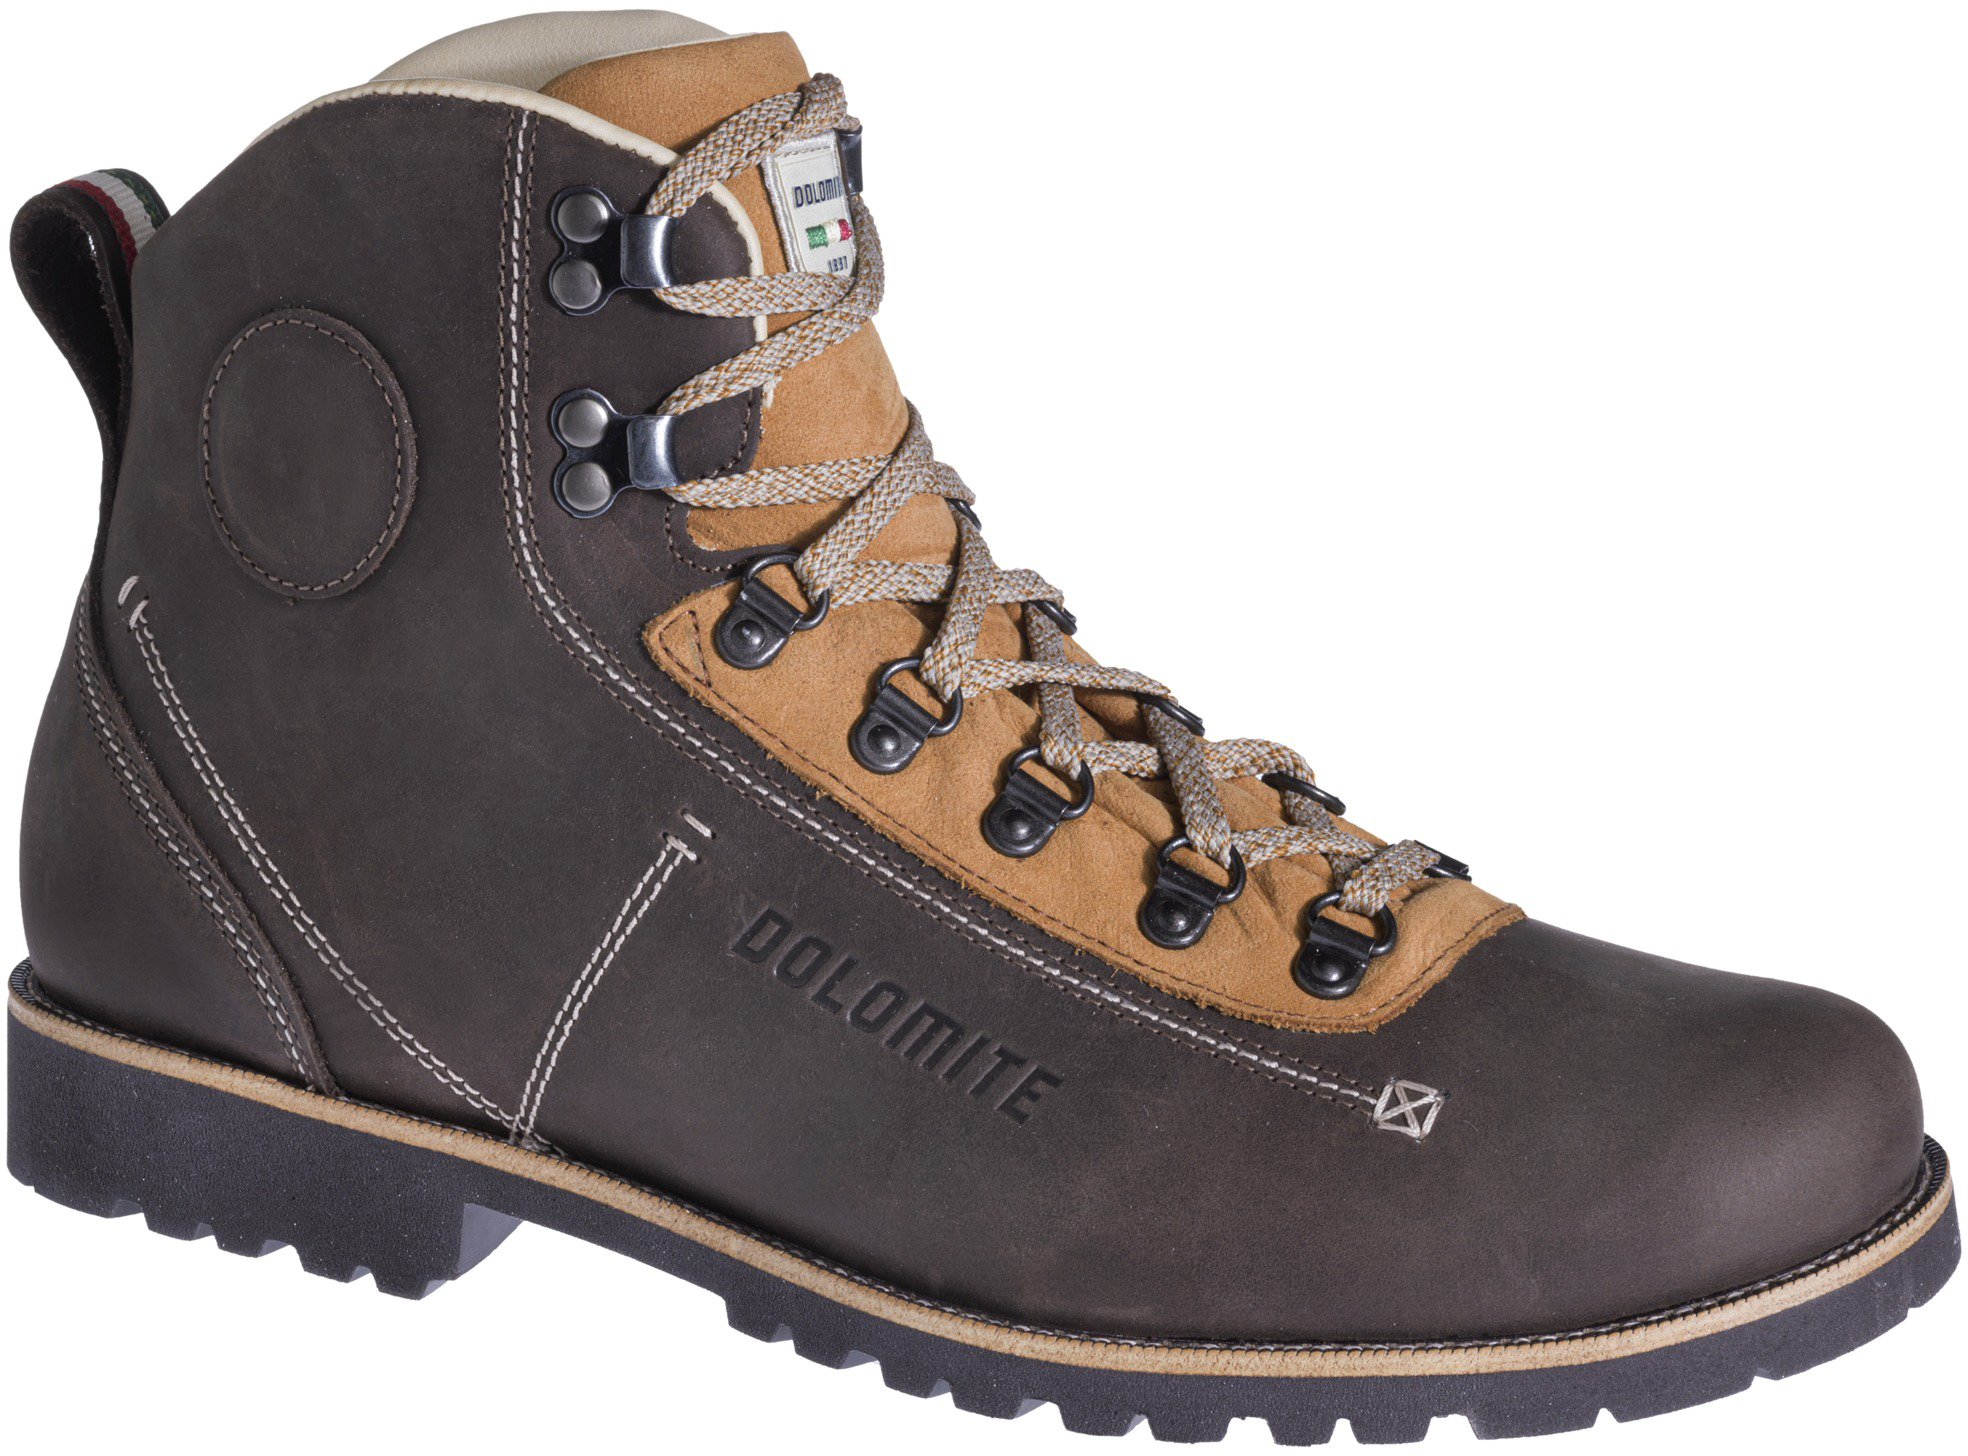 Dolomite 54 La Classica LH Shoes | w/ Free Shipping and Handling